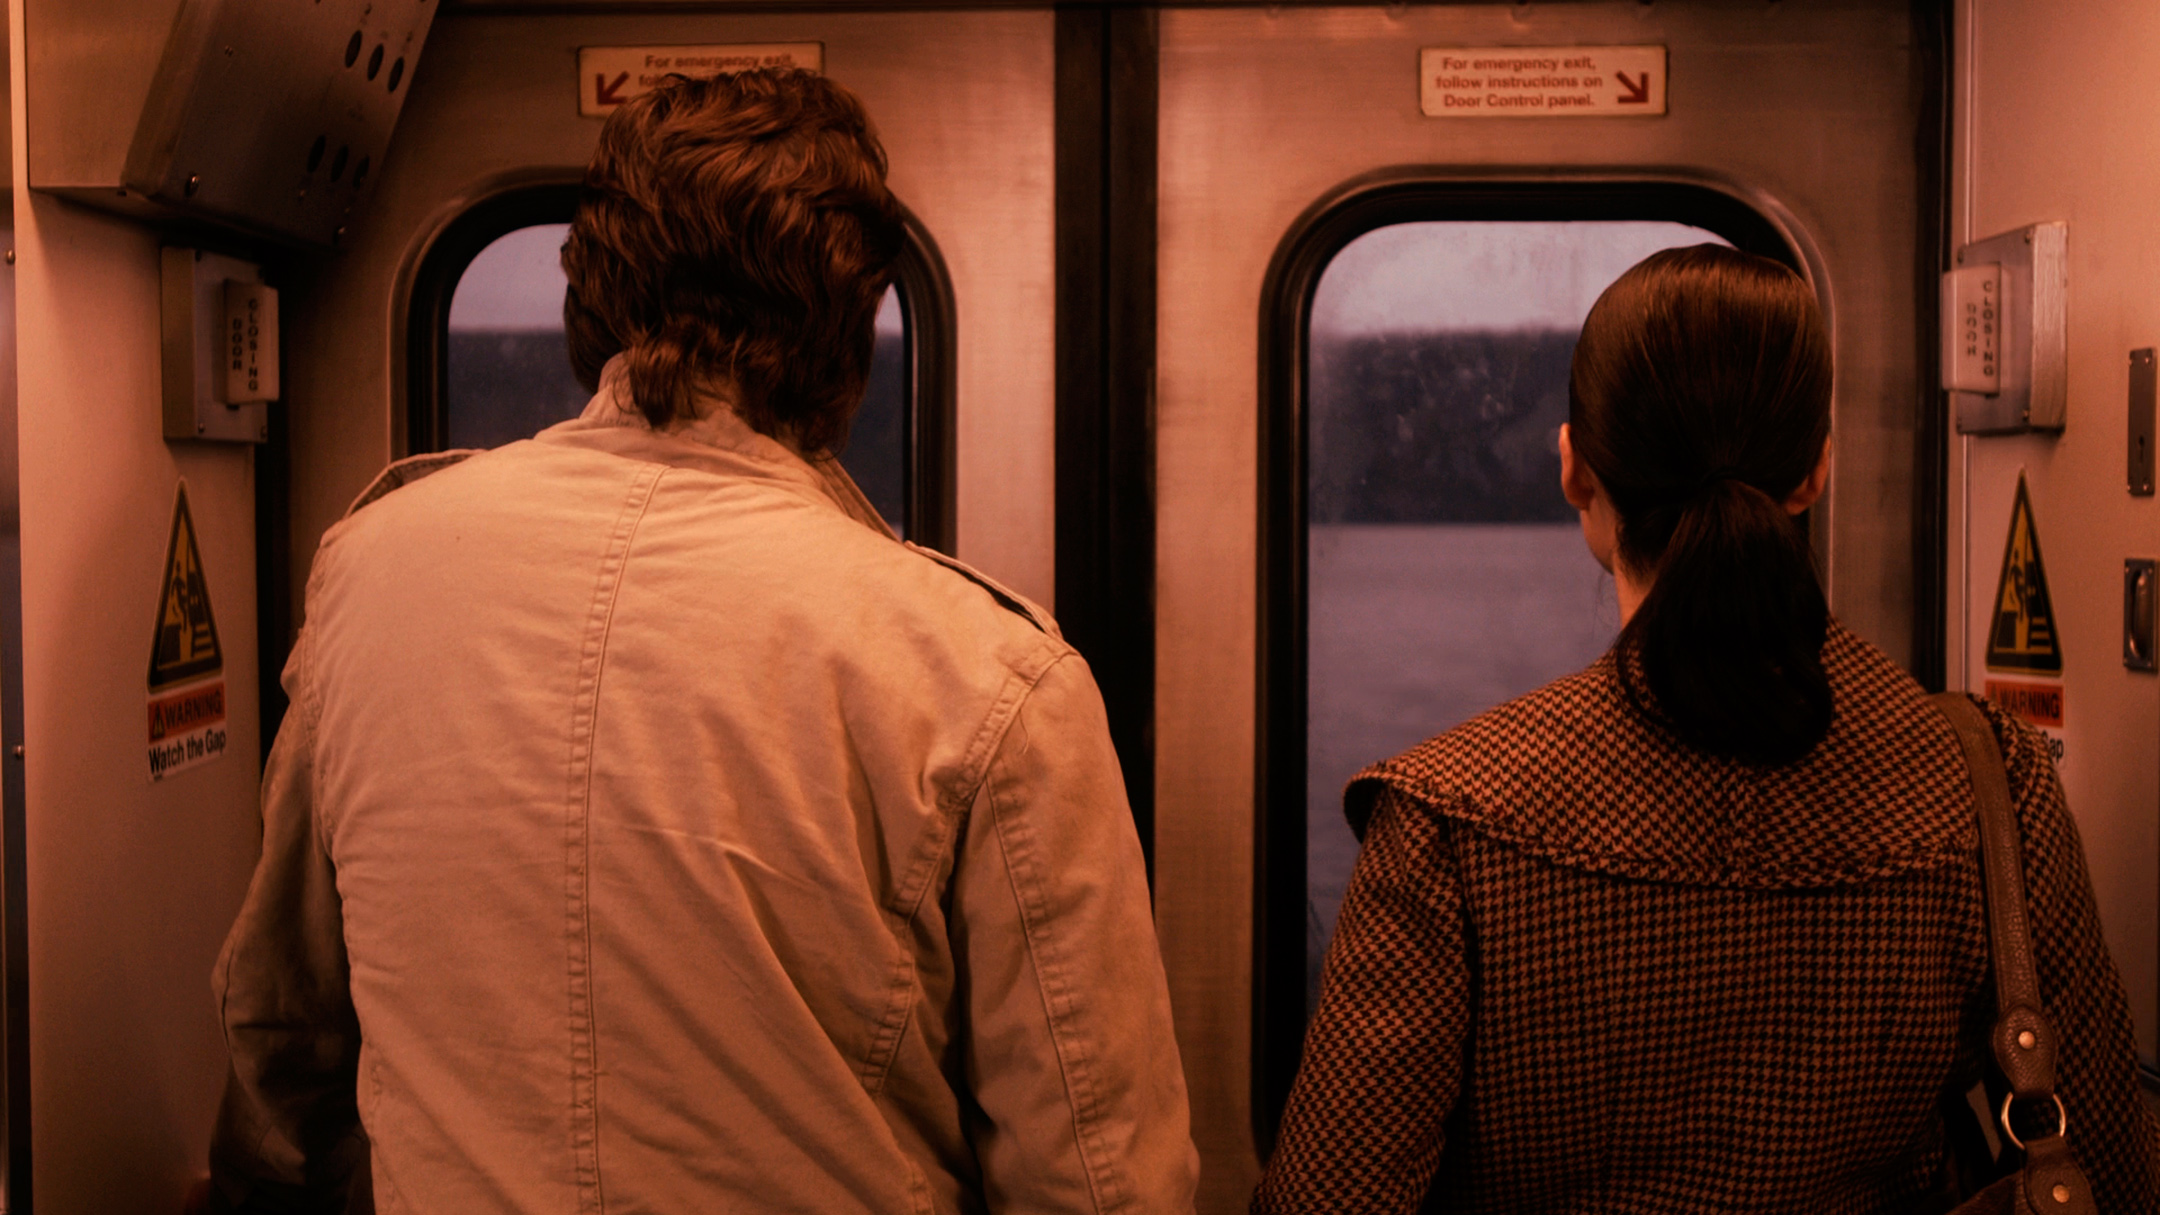 Still of Nicki Aycox and Henry Ian Cusick in The Girl on the Train (2013)